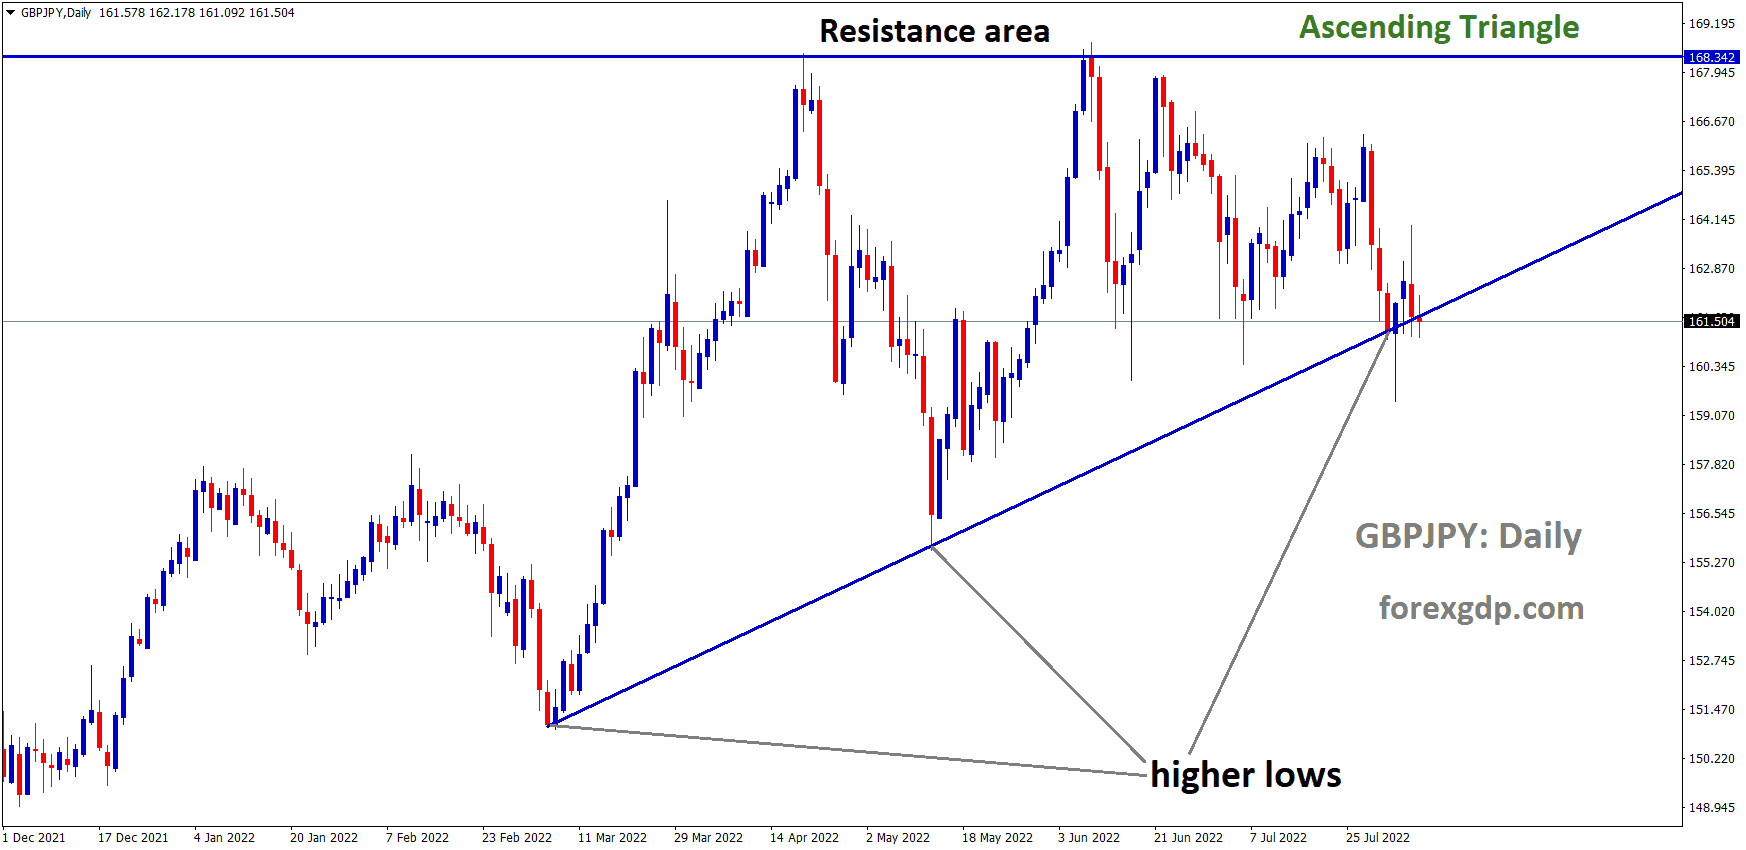 GBPJPY is moving in the Ascending triangle pattern and the Market has reached the higher low area of the pattern